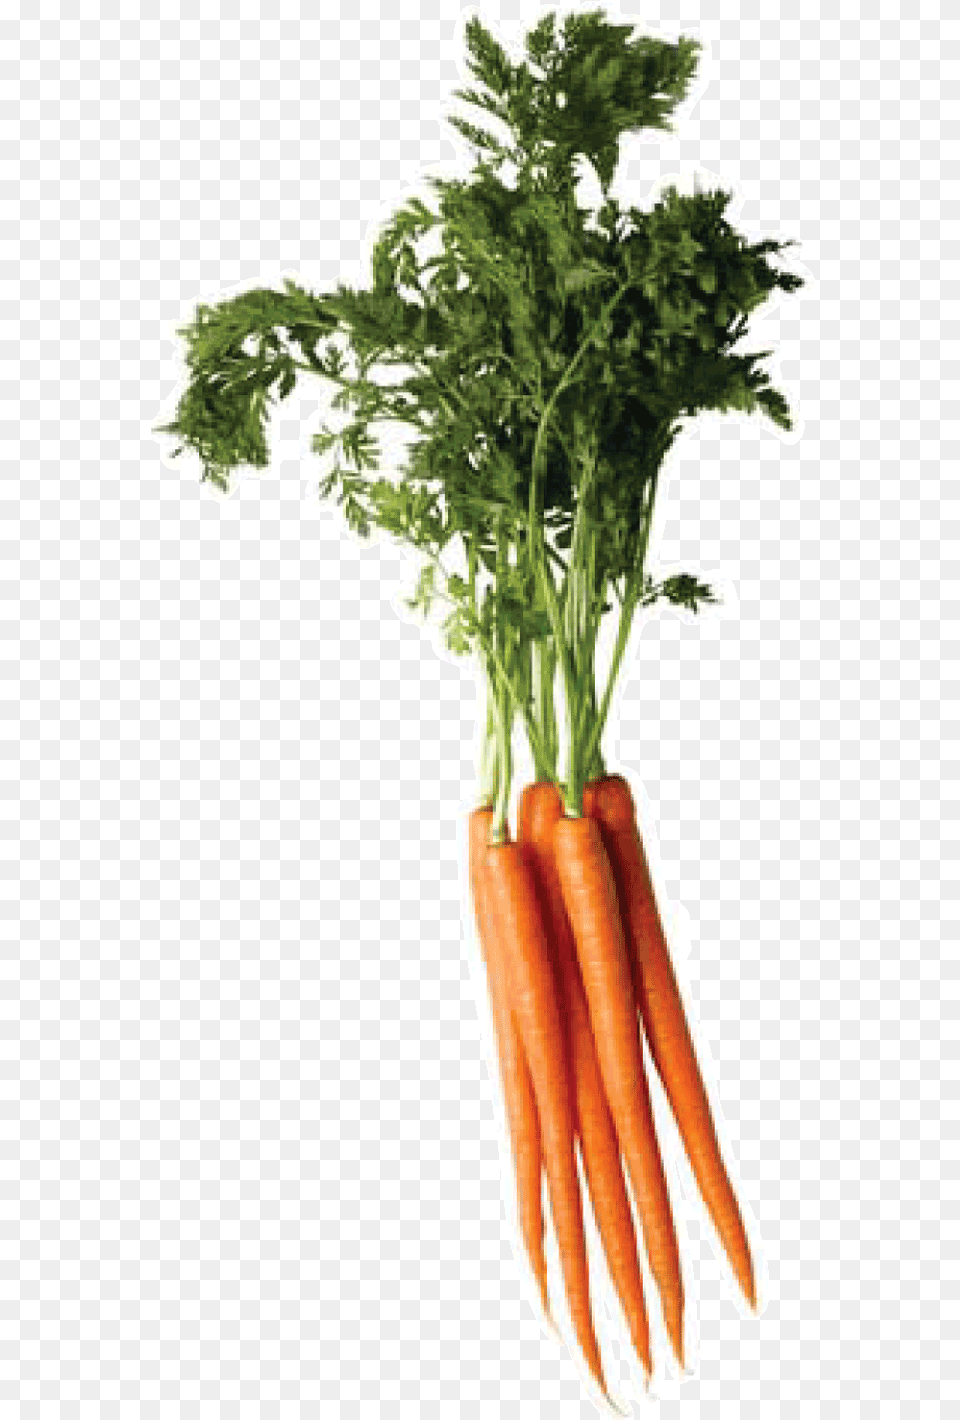 Carrot Image Carrot Top, Food, Plant, Produce, Vegetable Free Png Download